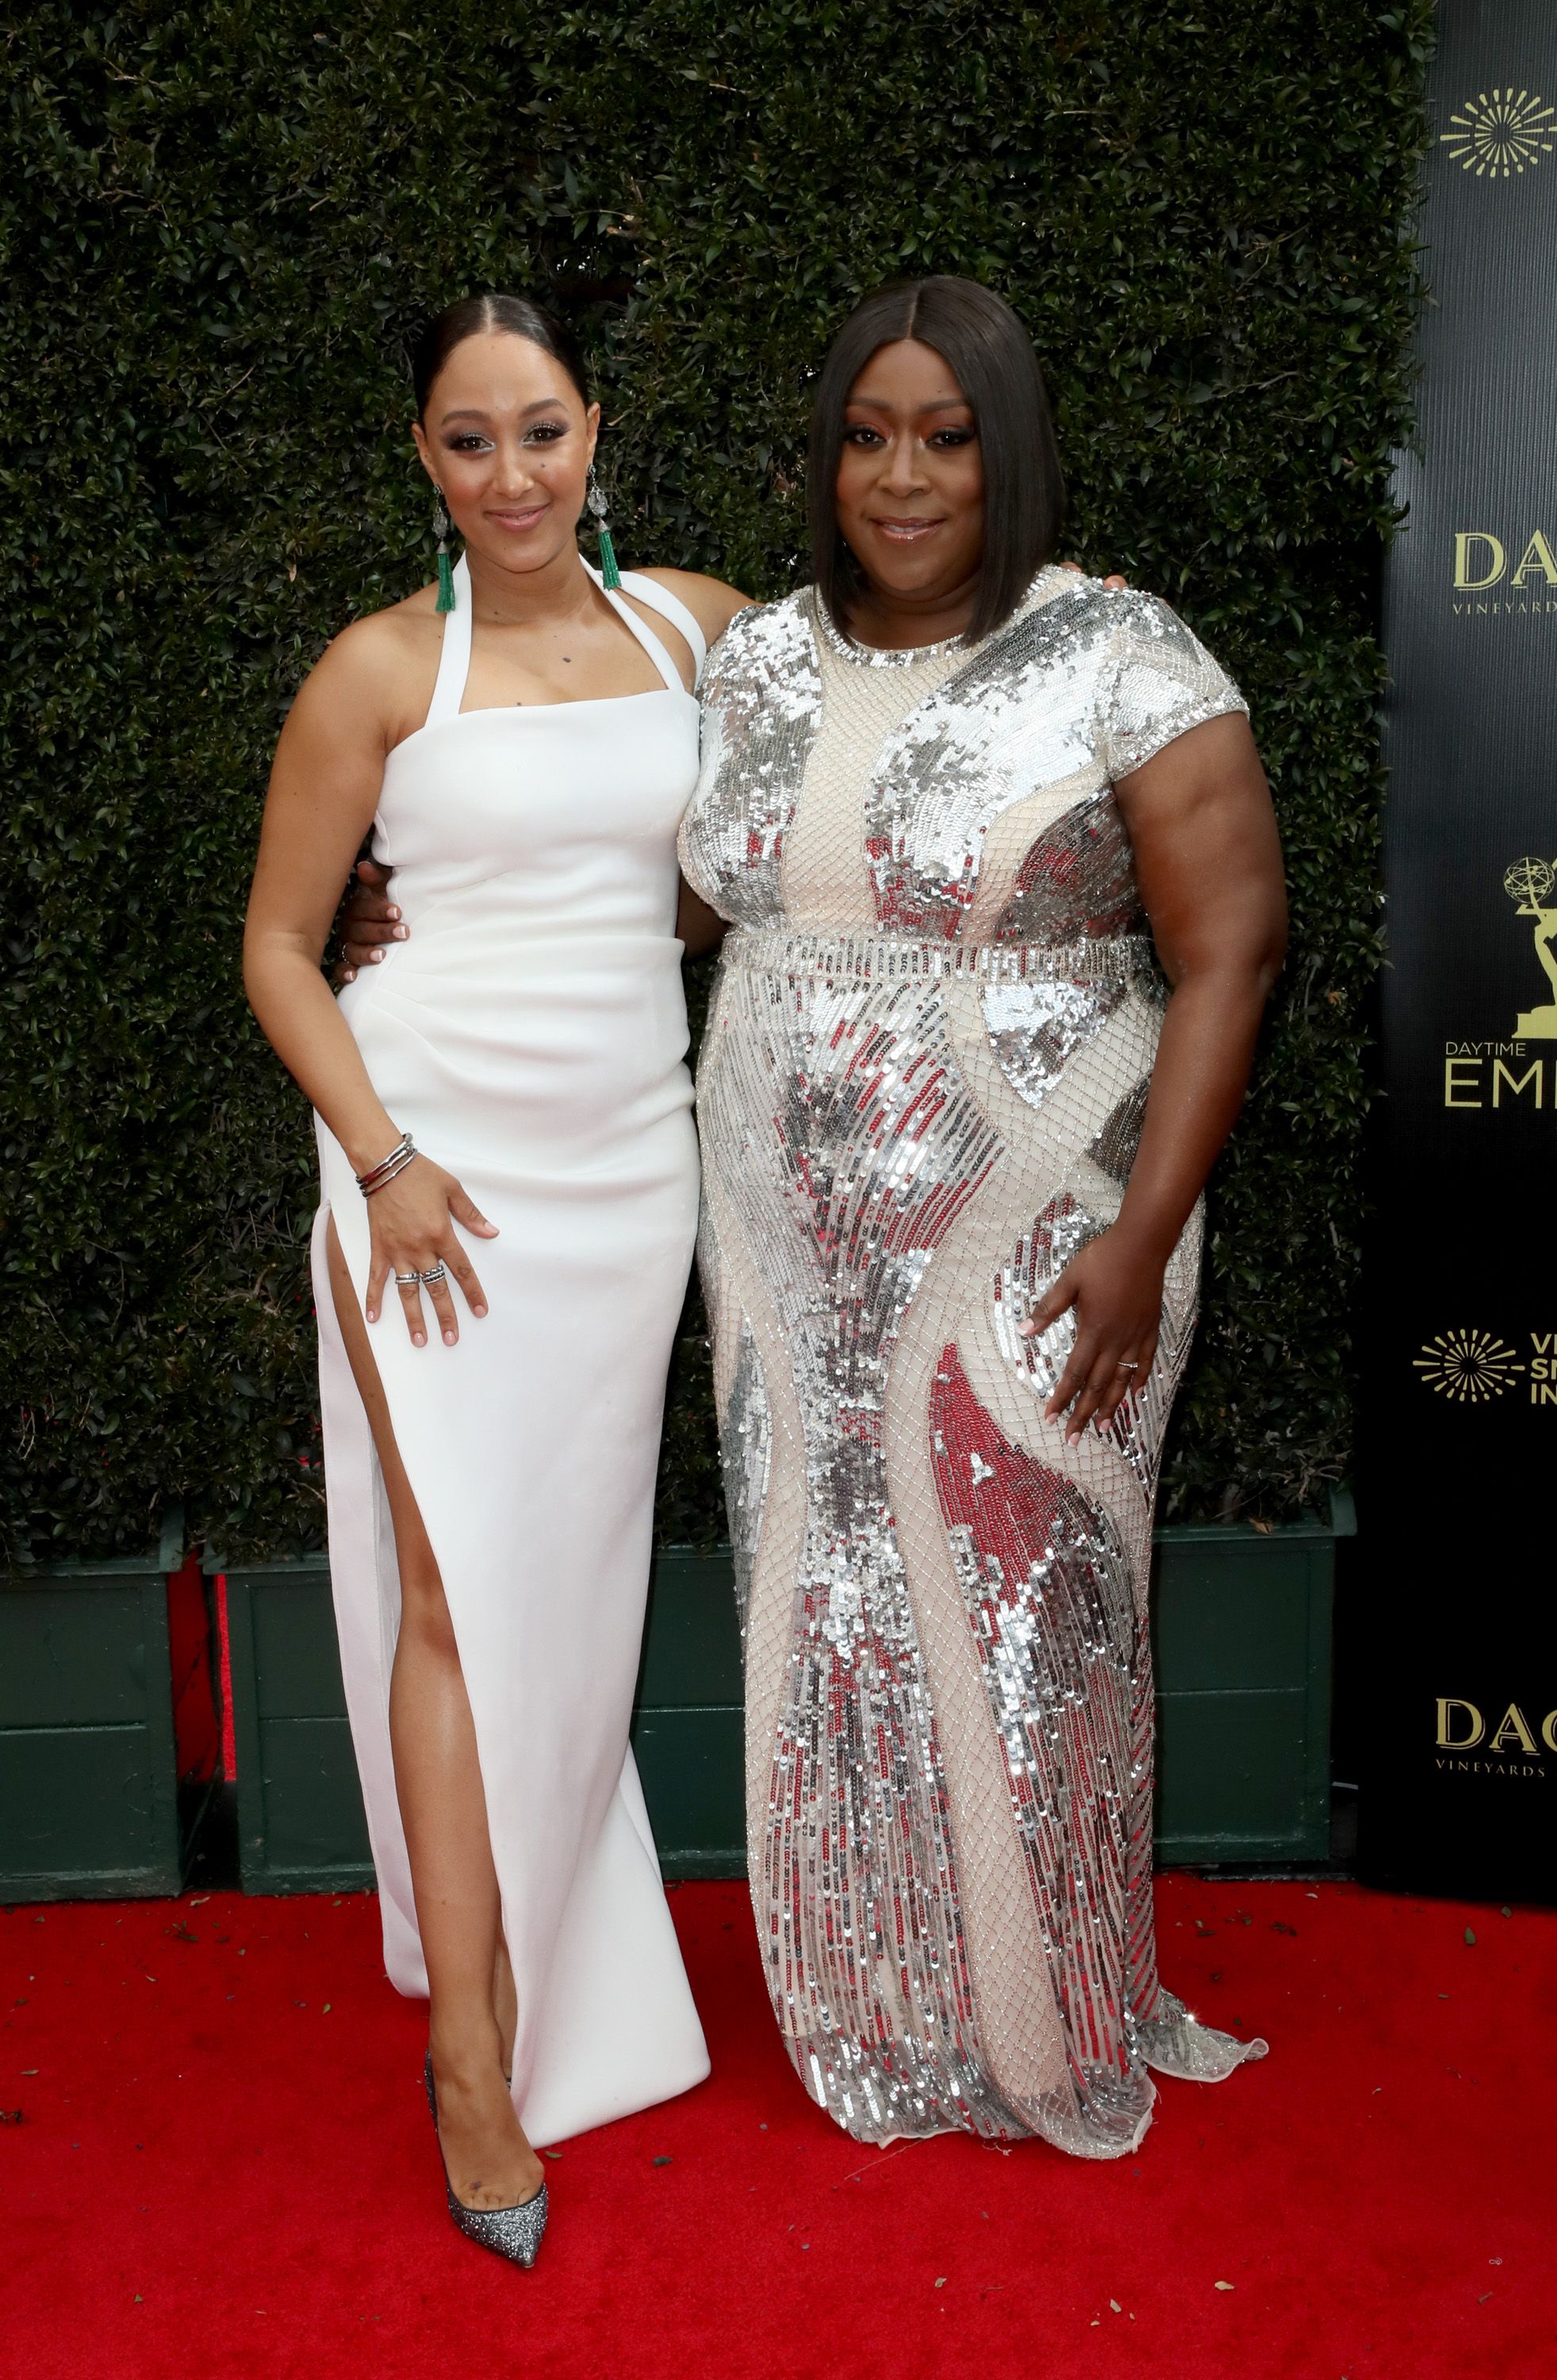 Loni Love and "The Real" co-host Tamera Mowry at the 2019 Emmy Daytime Awards | Source: Getty Images